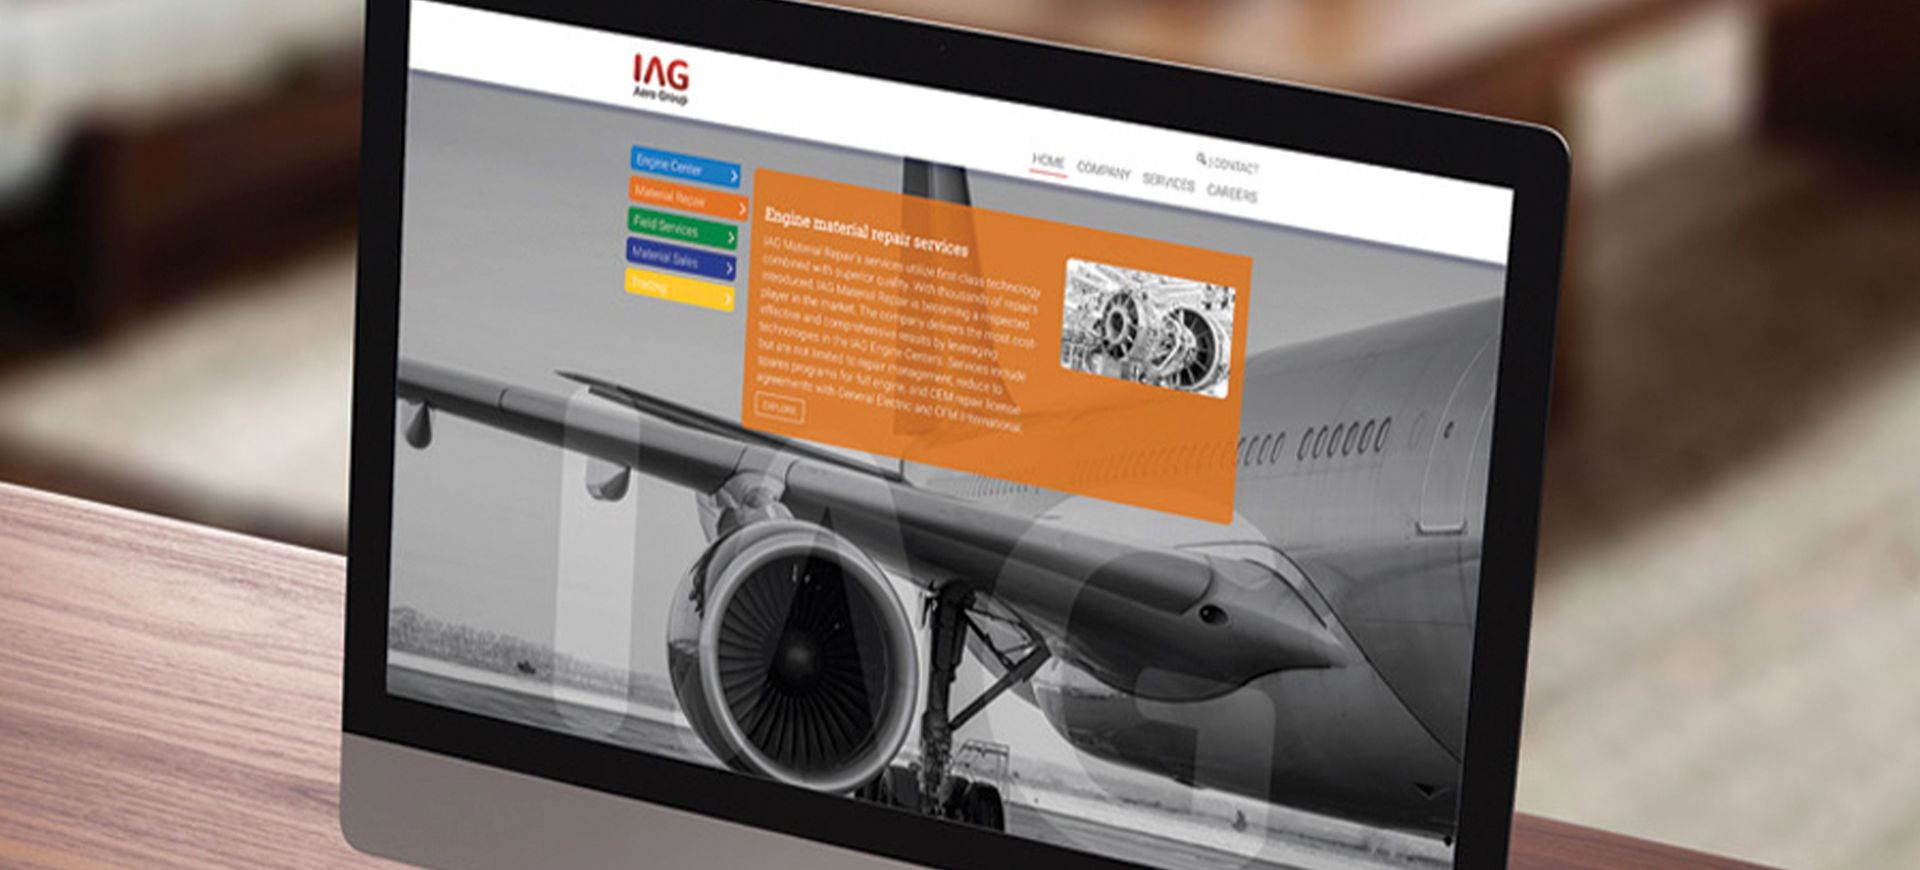 How Storm12 helped rebrand IAG